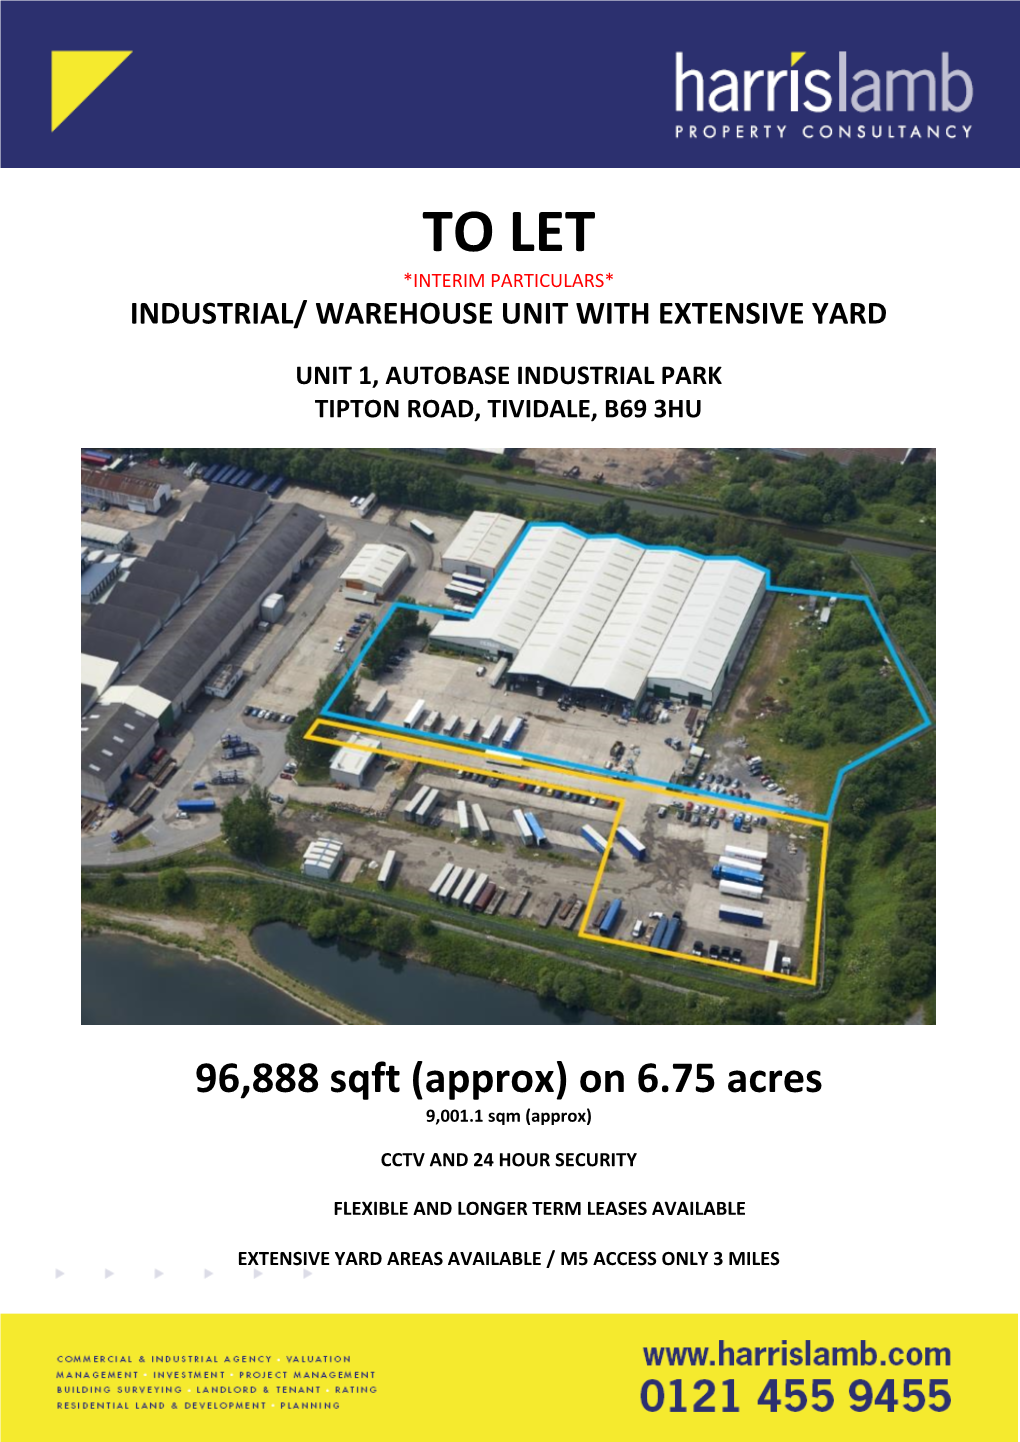 To Let *Interim Particulars* Industrial/ Warehouse Unit with Extensive Yard